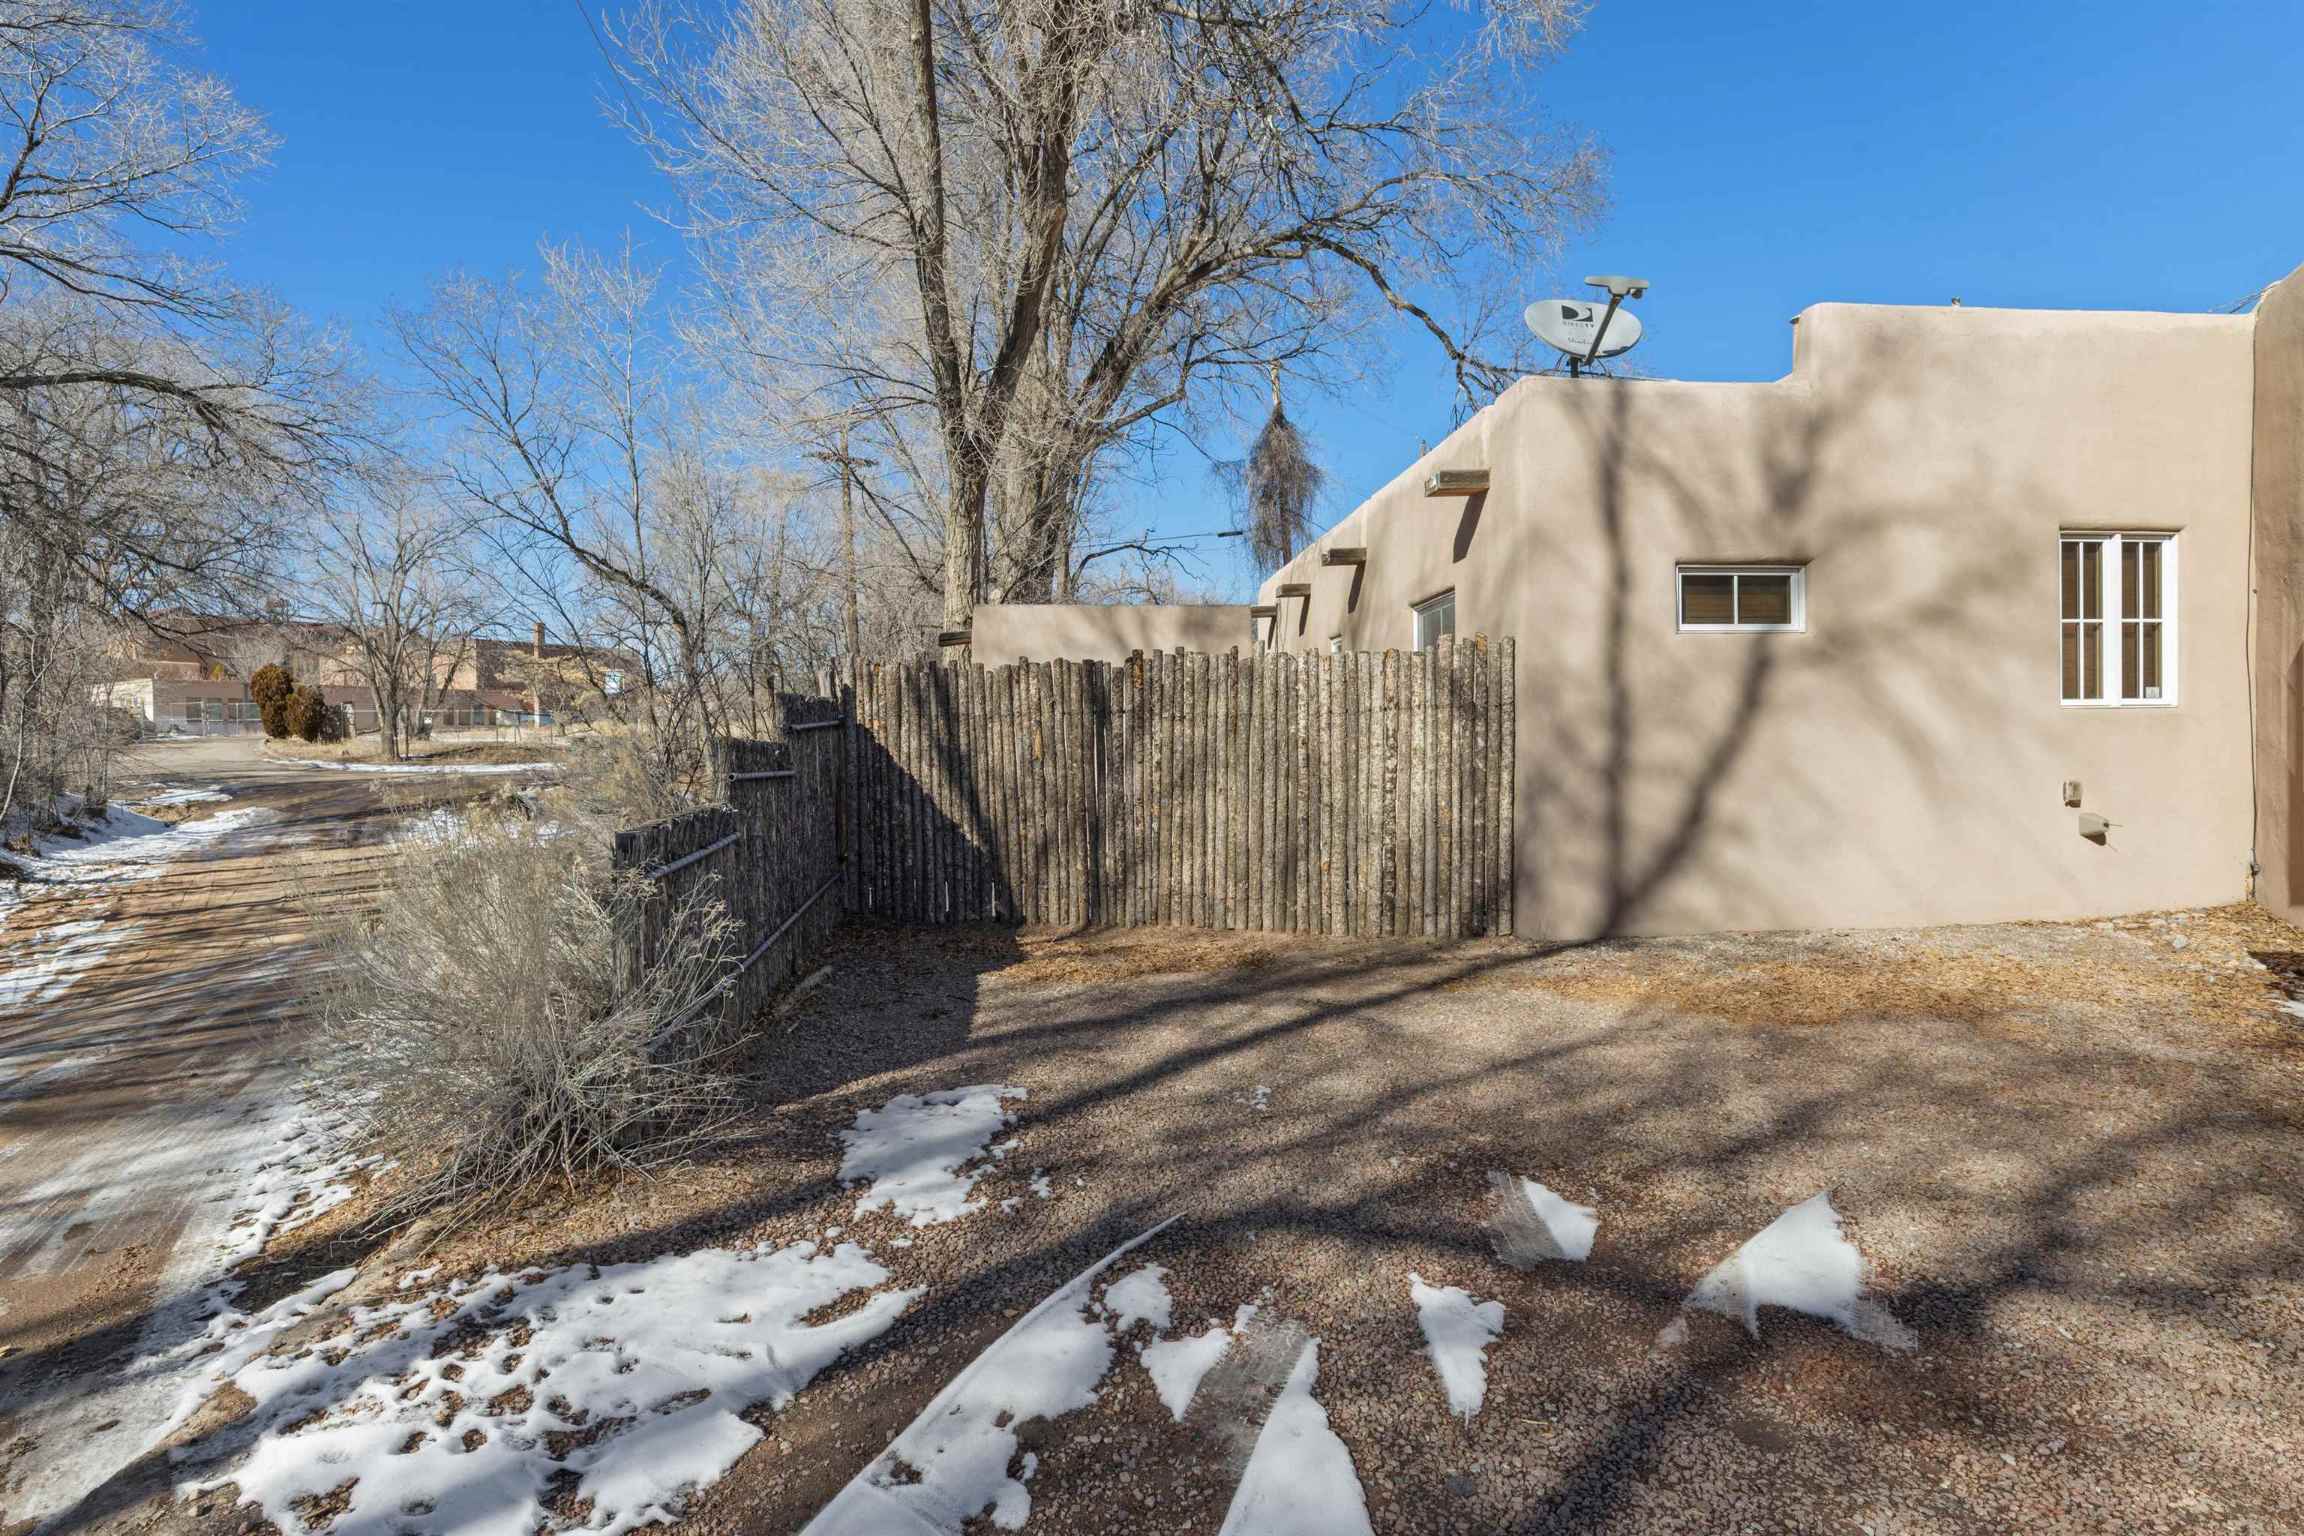 615 Griffin, Santa Fe, New Mexico 87501, 1 Bedroom Bedrooms, ,1 BathroomBathrooms,Residential,For Sale,615 Griffin,202200395